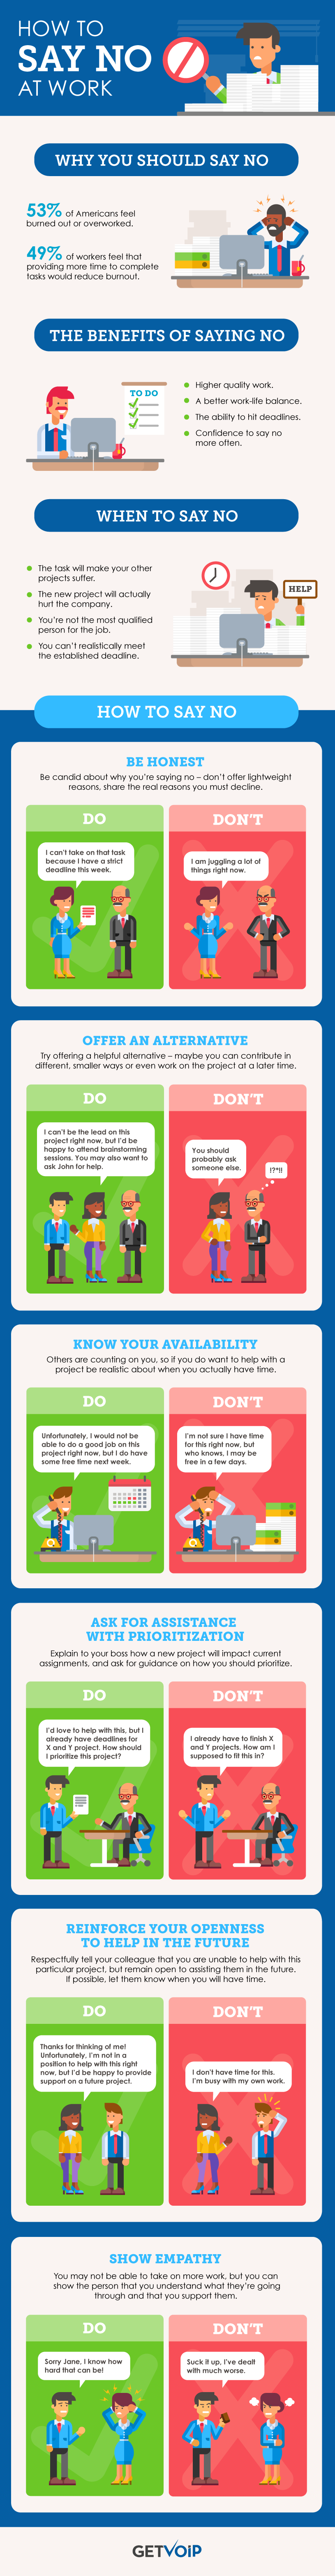 How To Respectfully Say No To Your Colleagues - #Infographic